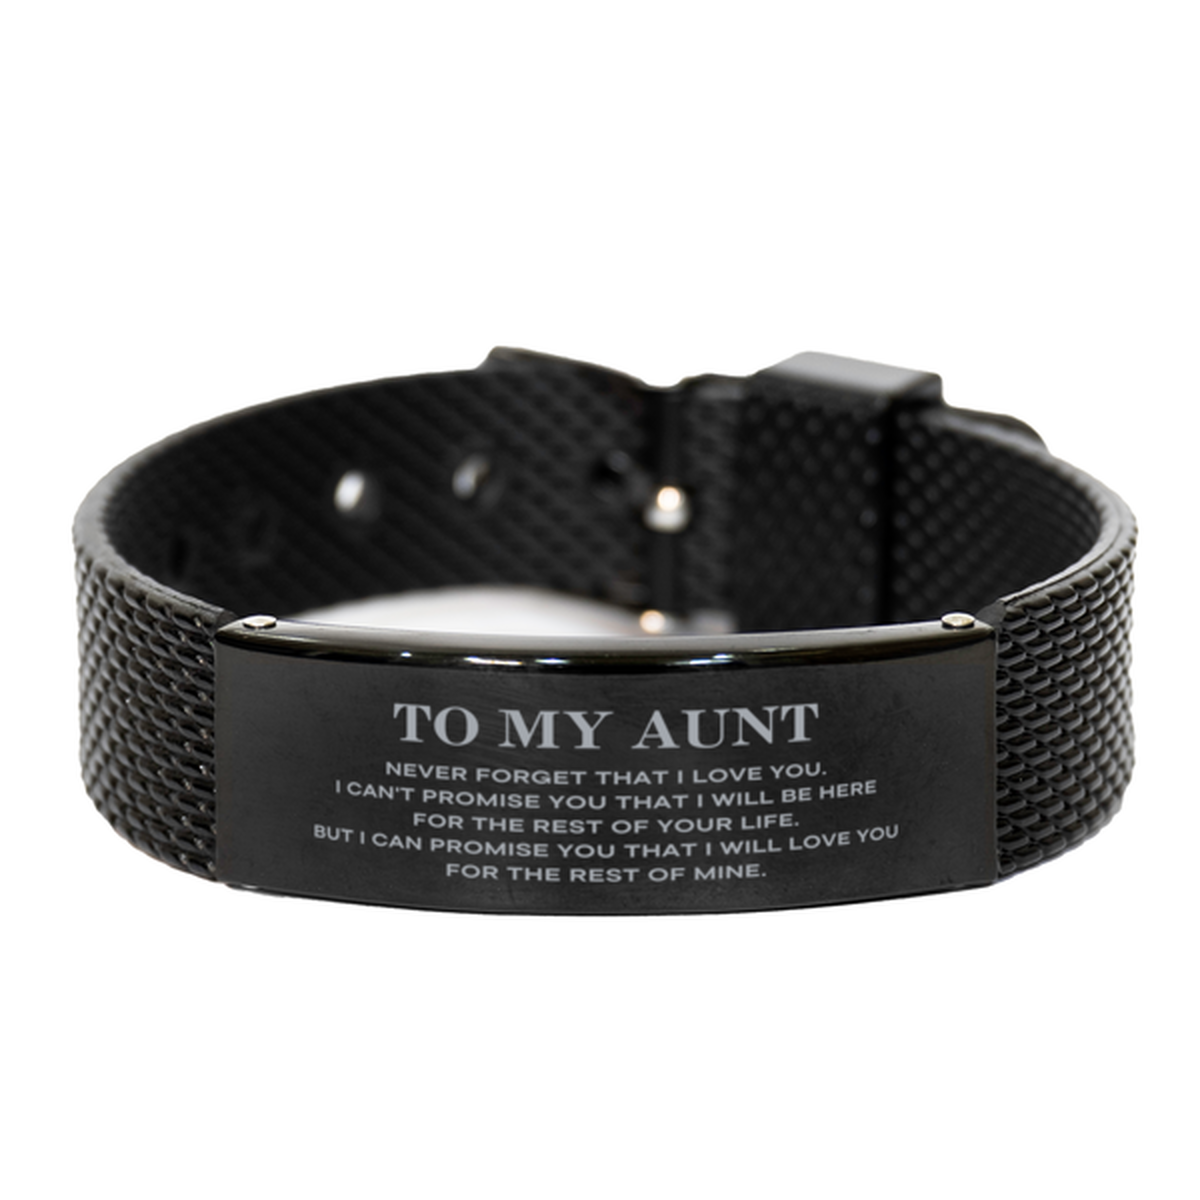 To My Aunt Gifts, I will love you for the rest of mine, Love Aunt Bracelet, Birthday Christmas Unique Black Shark Mesh Bracelet For Aunt